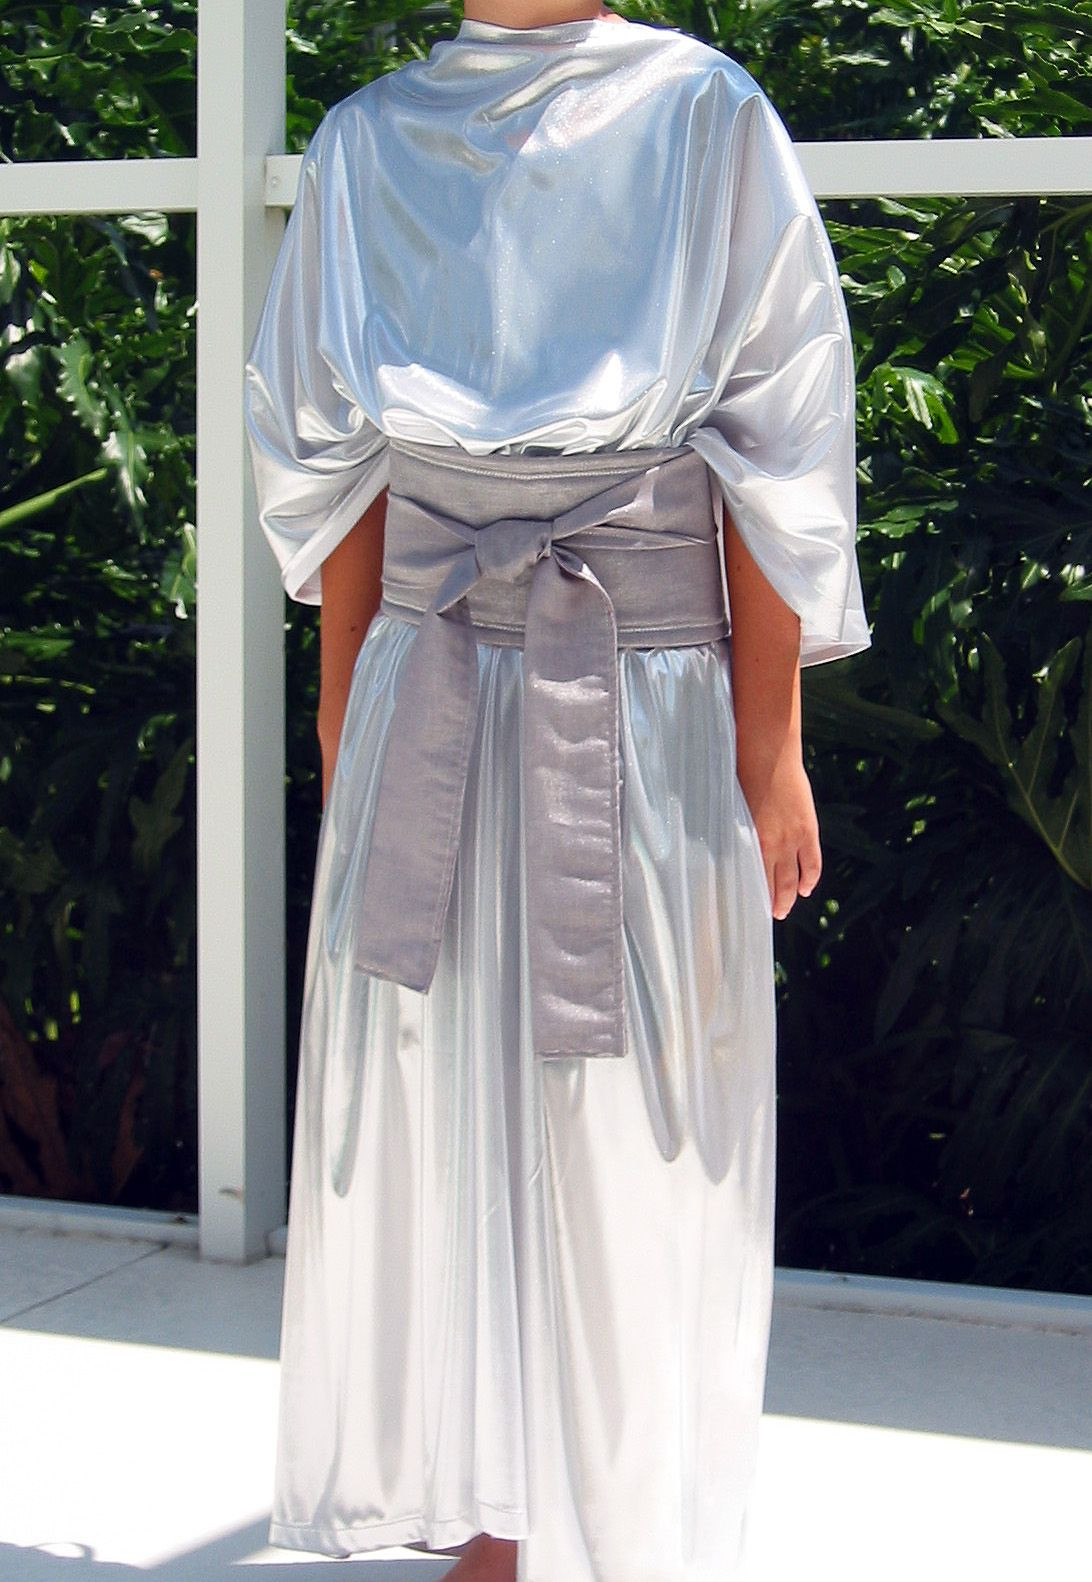 Bible Costumes For Adults DIY
 Biblical costume The belt is great